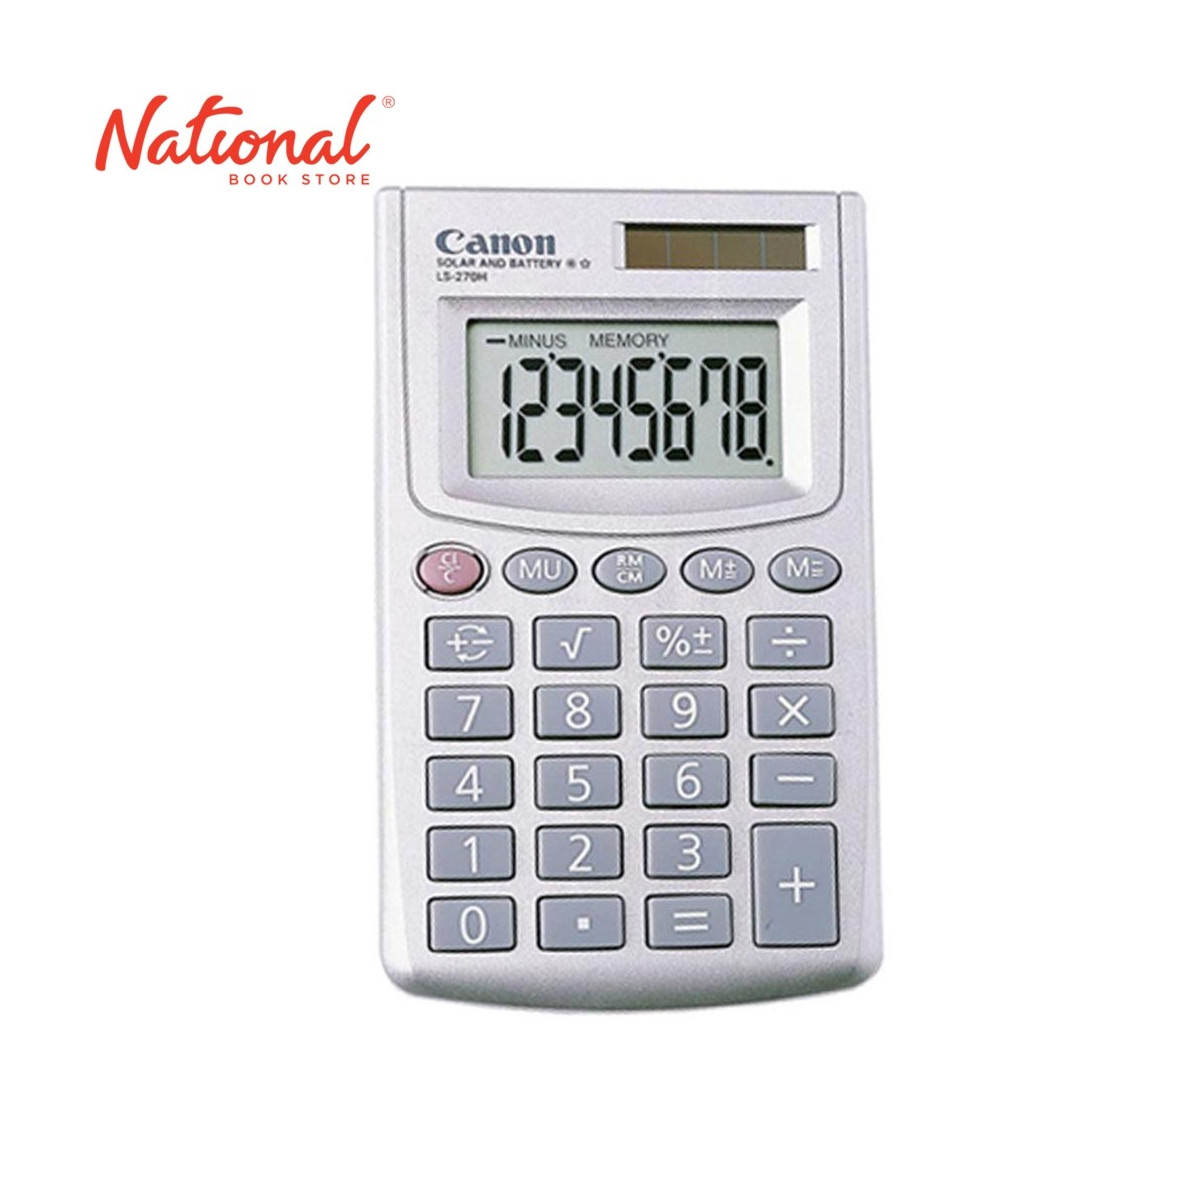 CANON HANDHELD CALCULATOR LS270 8 DIGITS DUAL POWER WITH WALLET CASE